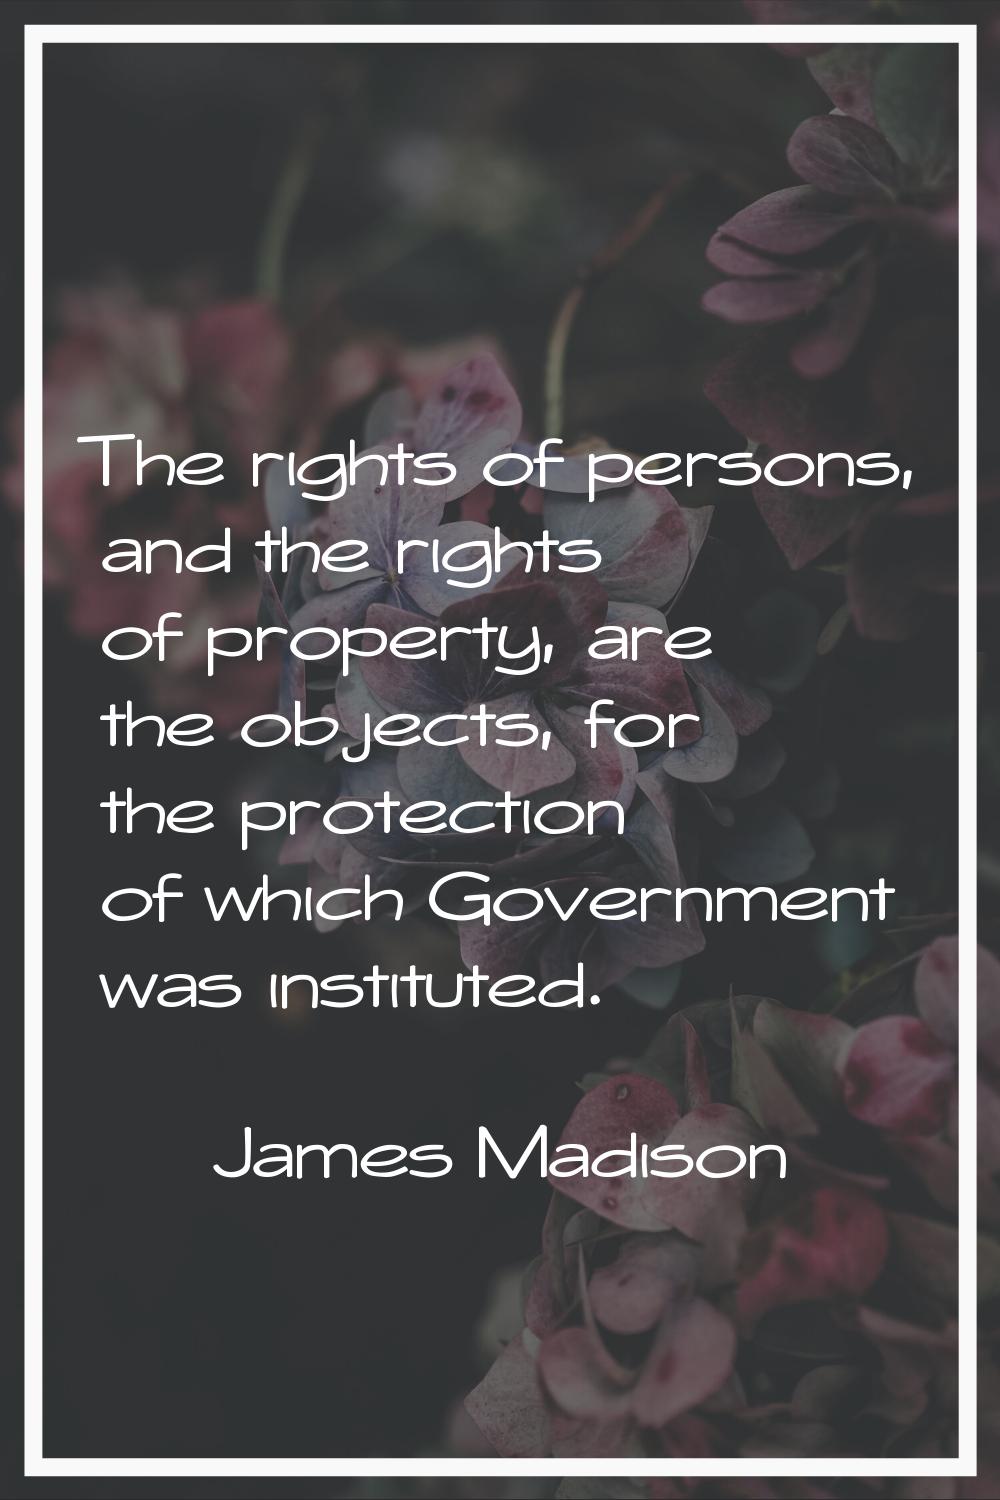 The rights of persons, and the rights of property, are the objects, for the protection of which Gov